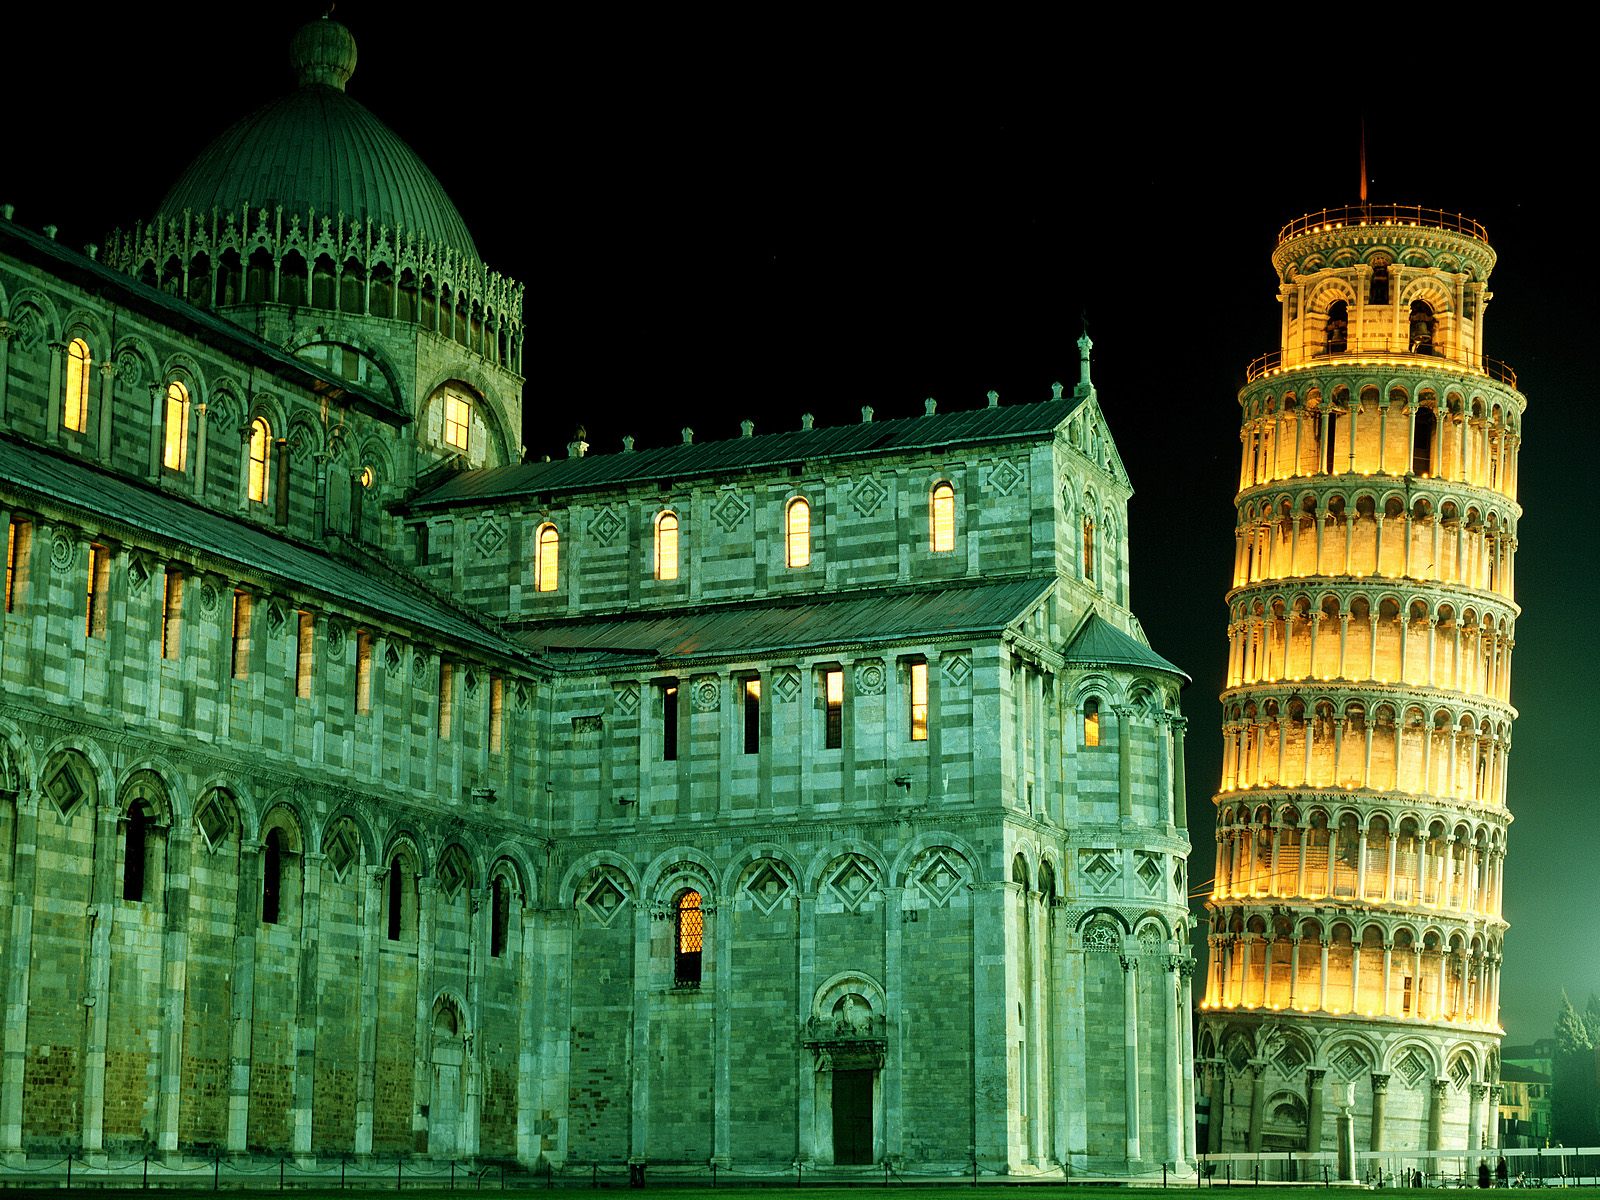 http://4.bp.blogspot.com/-x53DQUVnzl0/Tr5uiC9fAlI/AAAAAAAAEks/PWZoQSkBil8/s1600/Leaning+Tower+Of+Pisa%252C+Italy+hd+Wallpapers.jpg